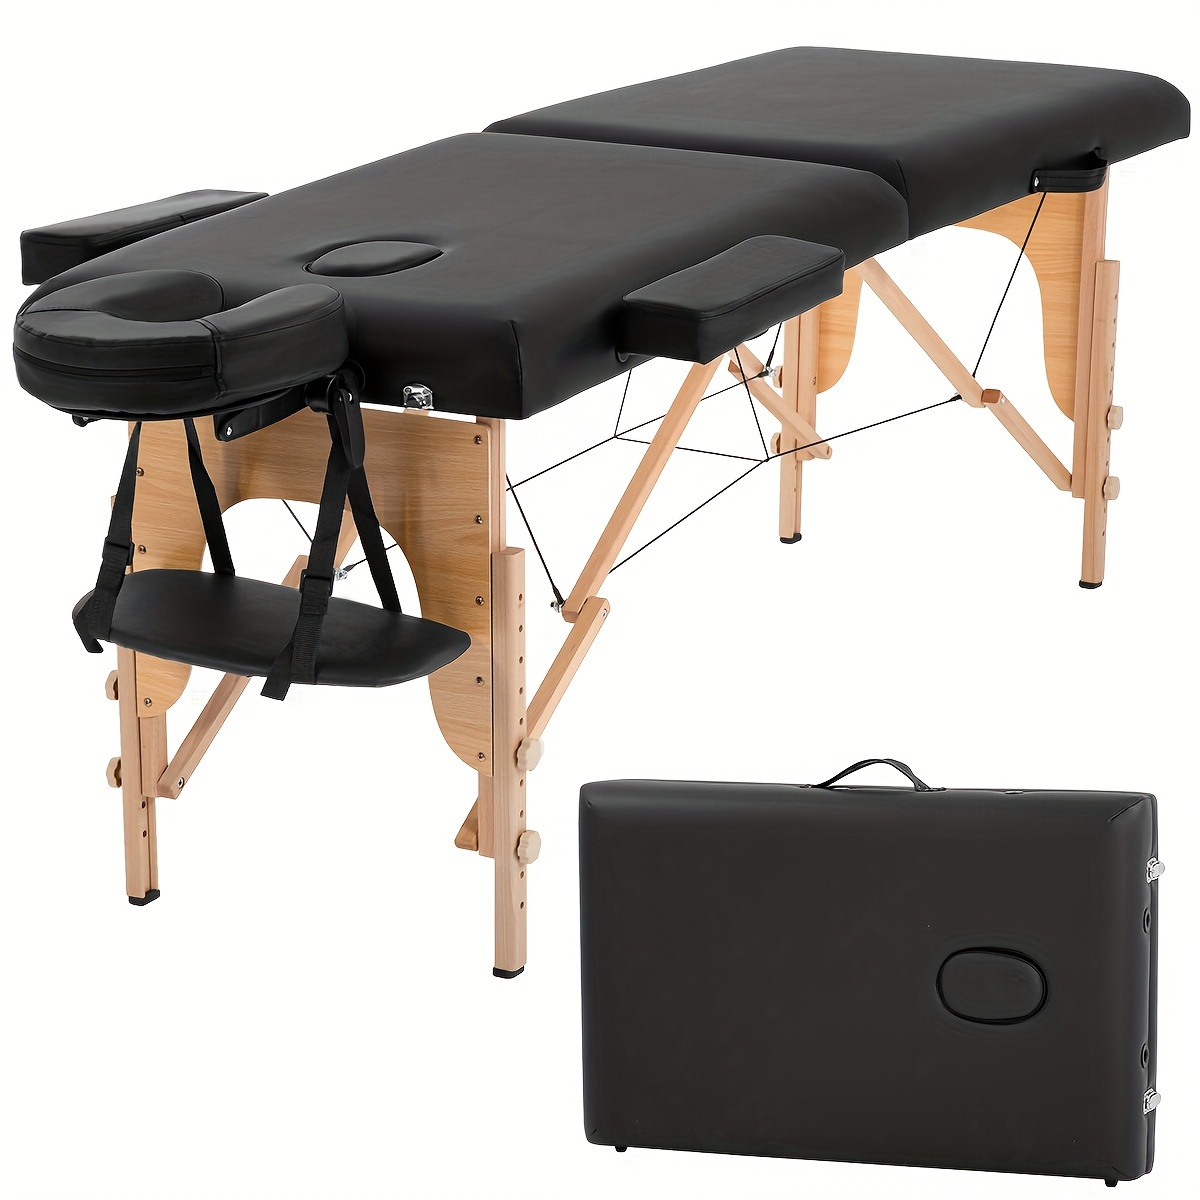 

2 Fold Massage Table Portable Massage Bed Lash Spa Bed Tattoo Face Cradle Bed Adjustable With Bag